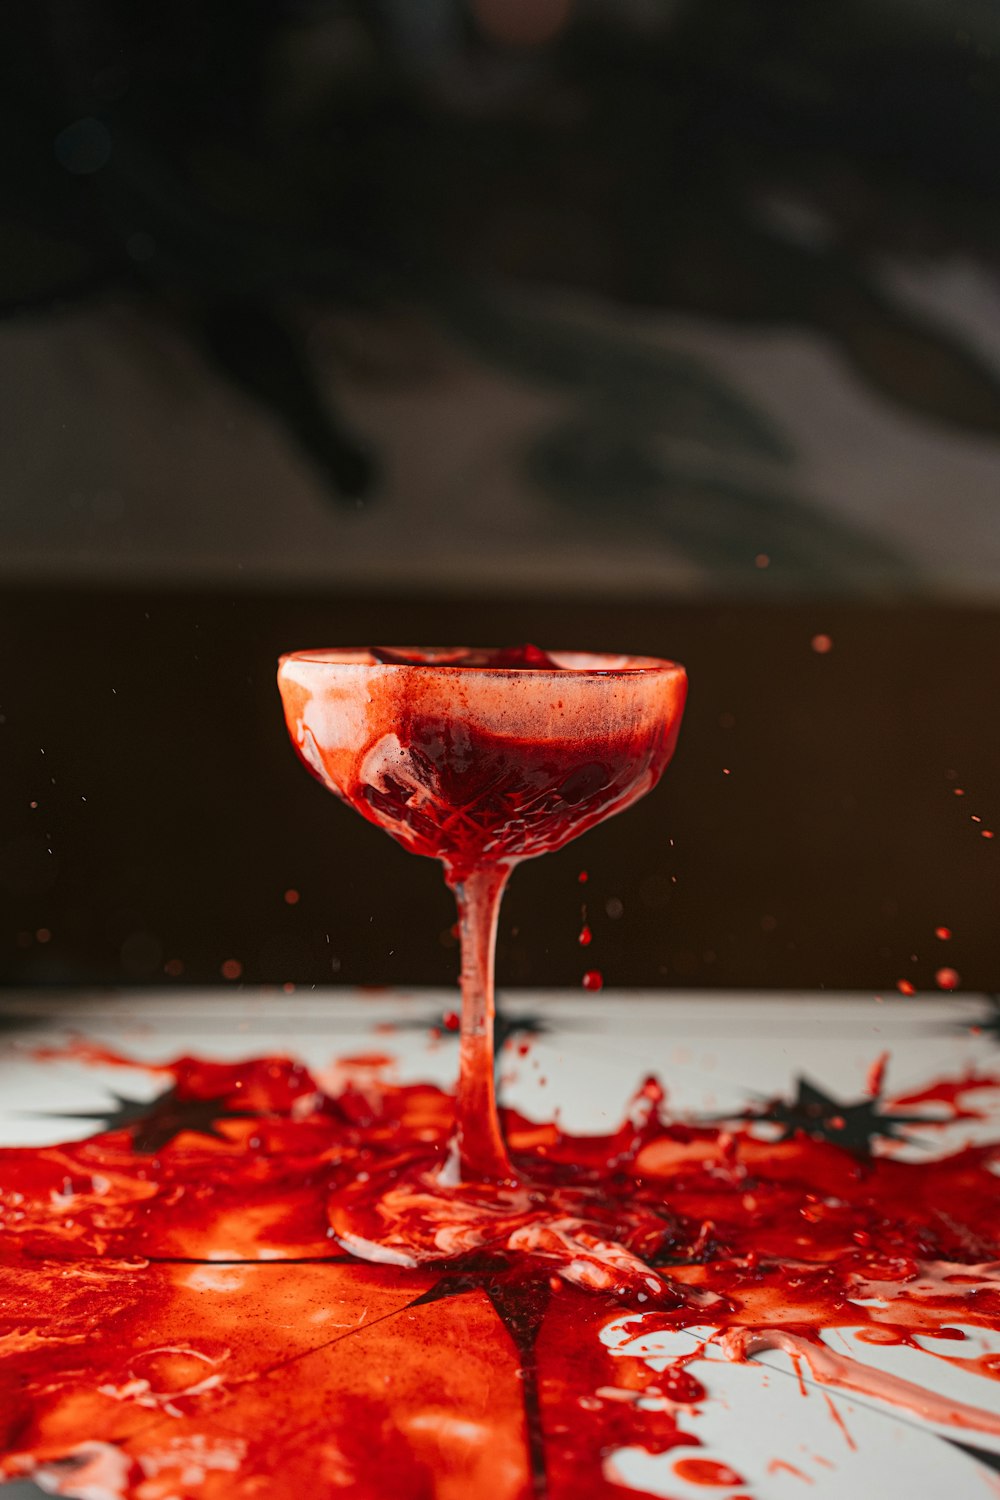 a red liquid pouring into a wine glass